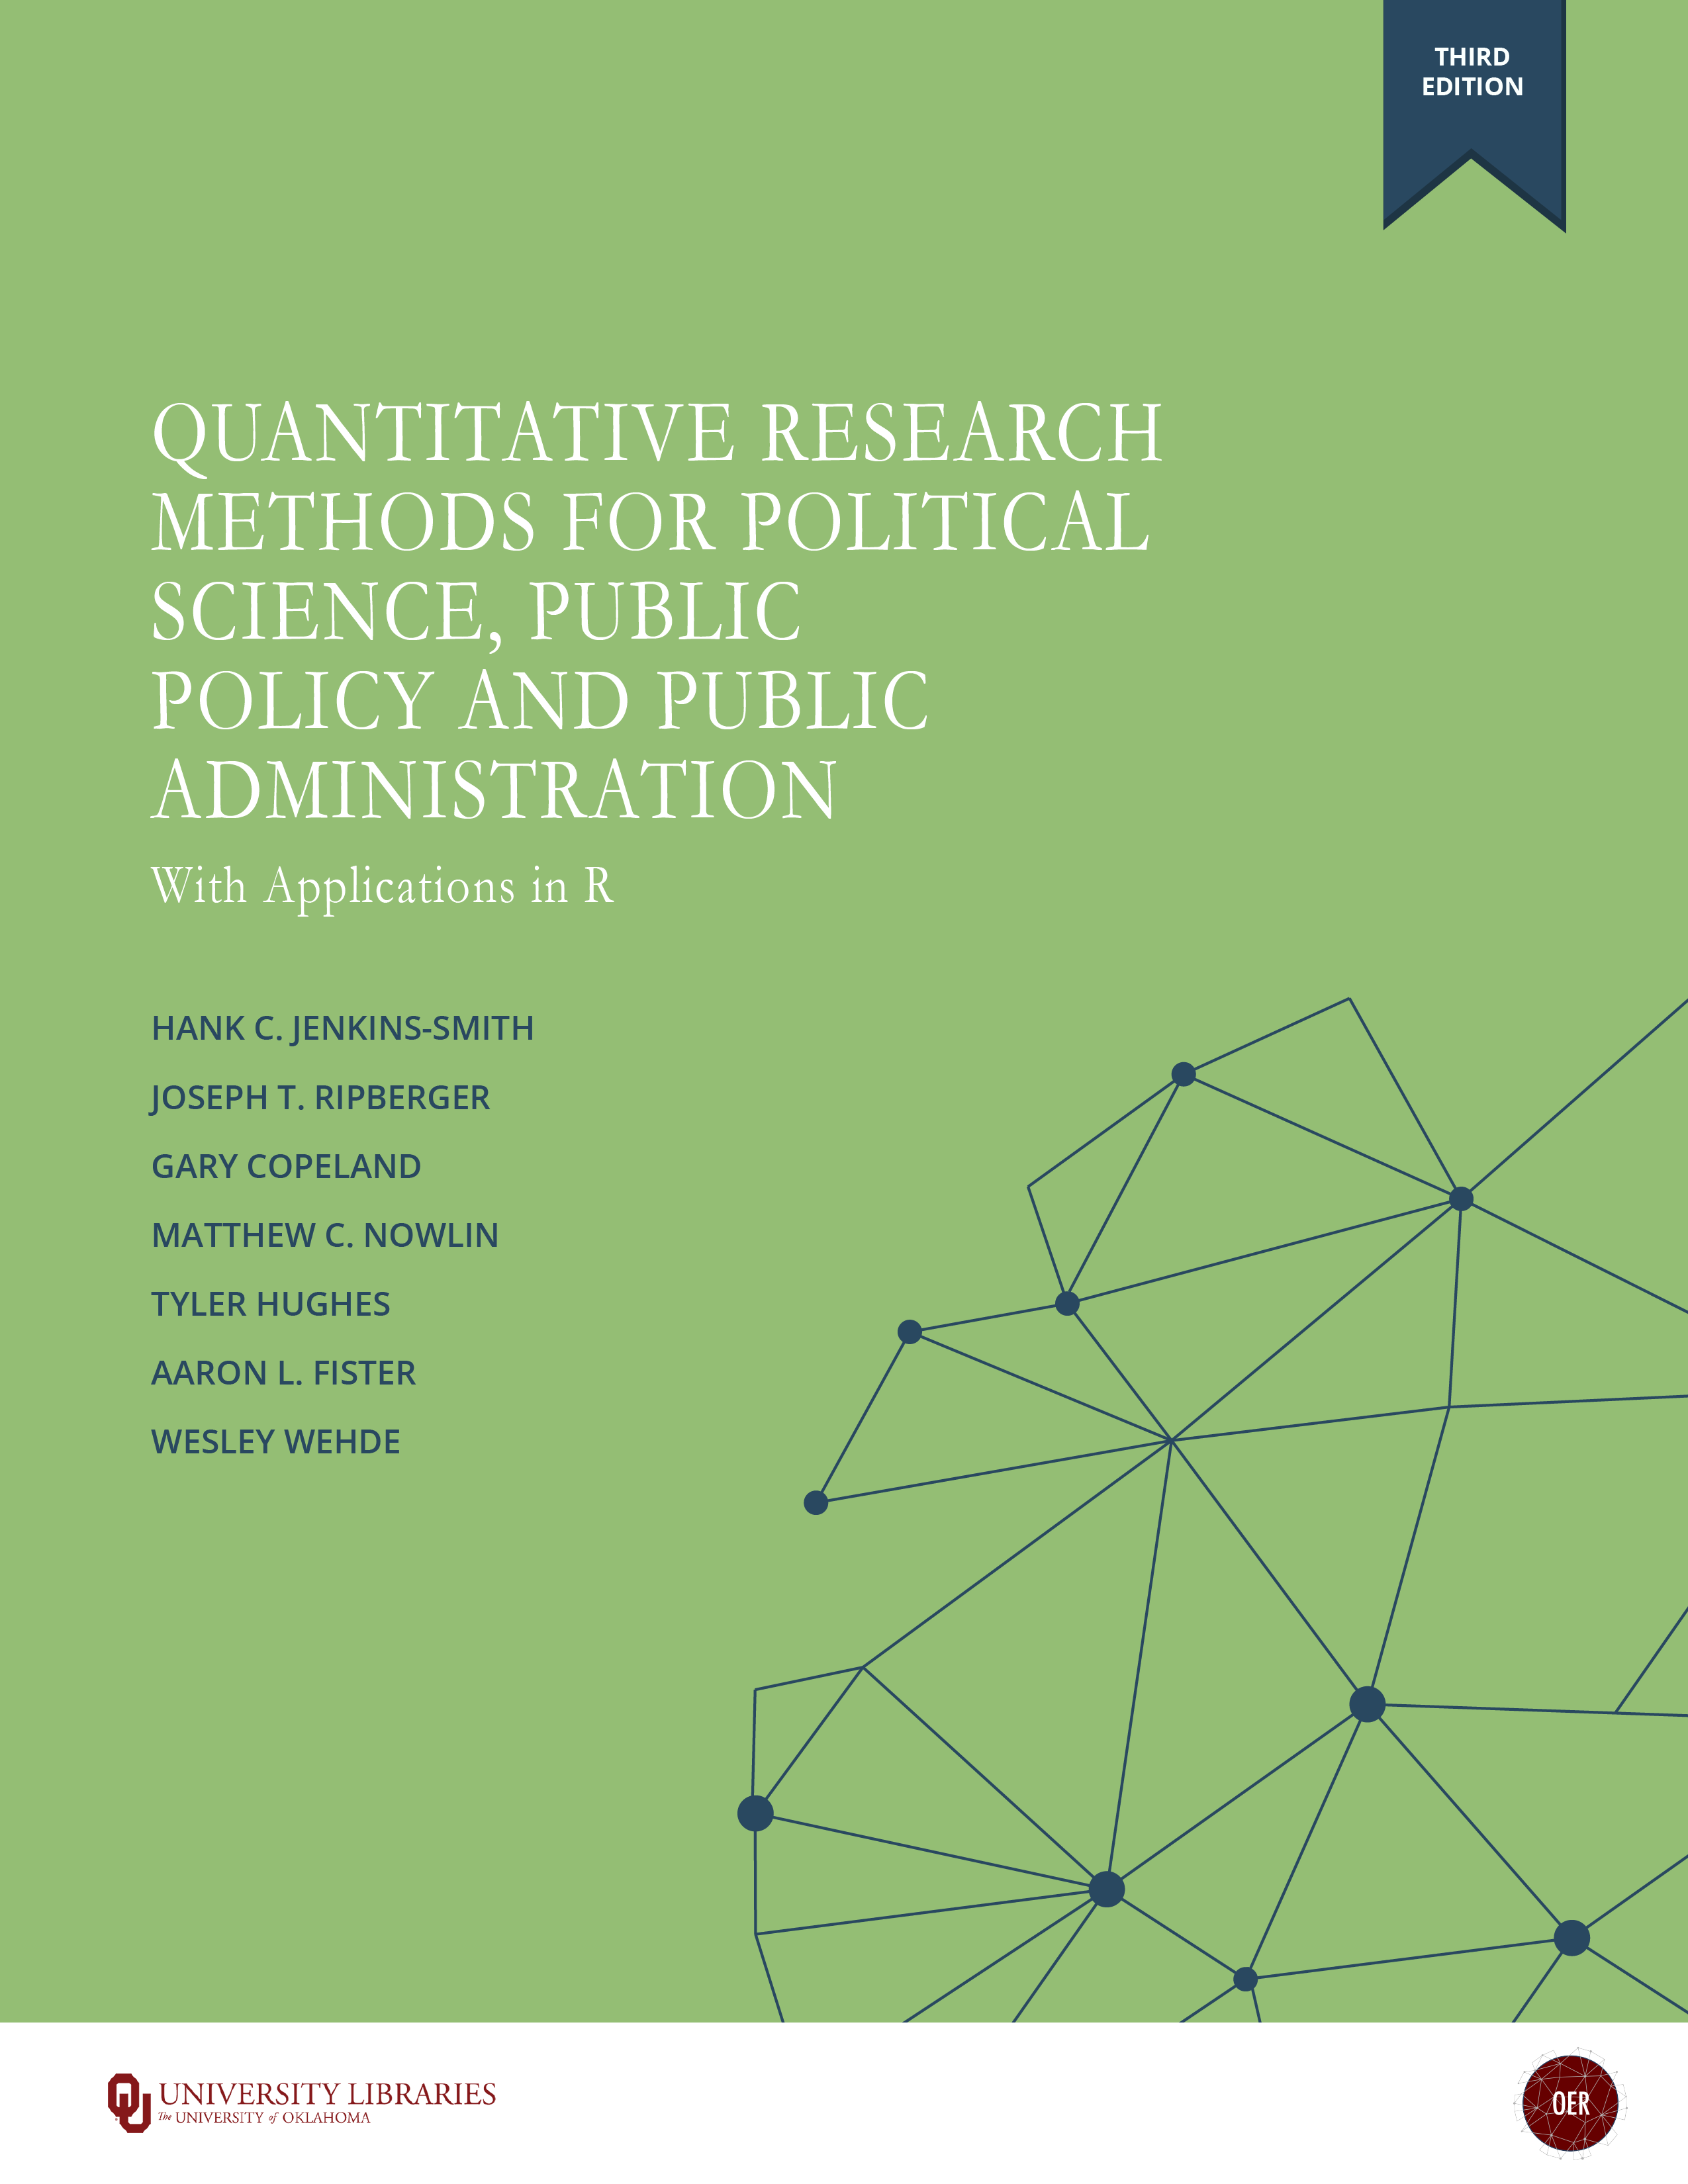 political science research and methods journal